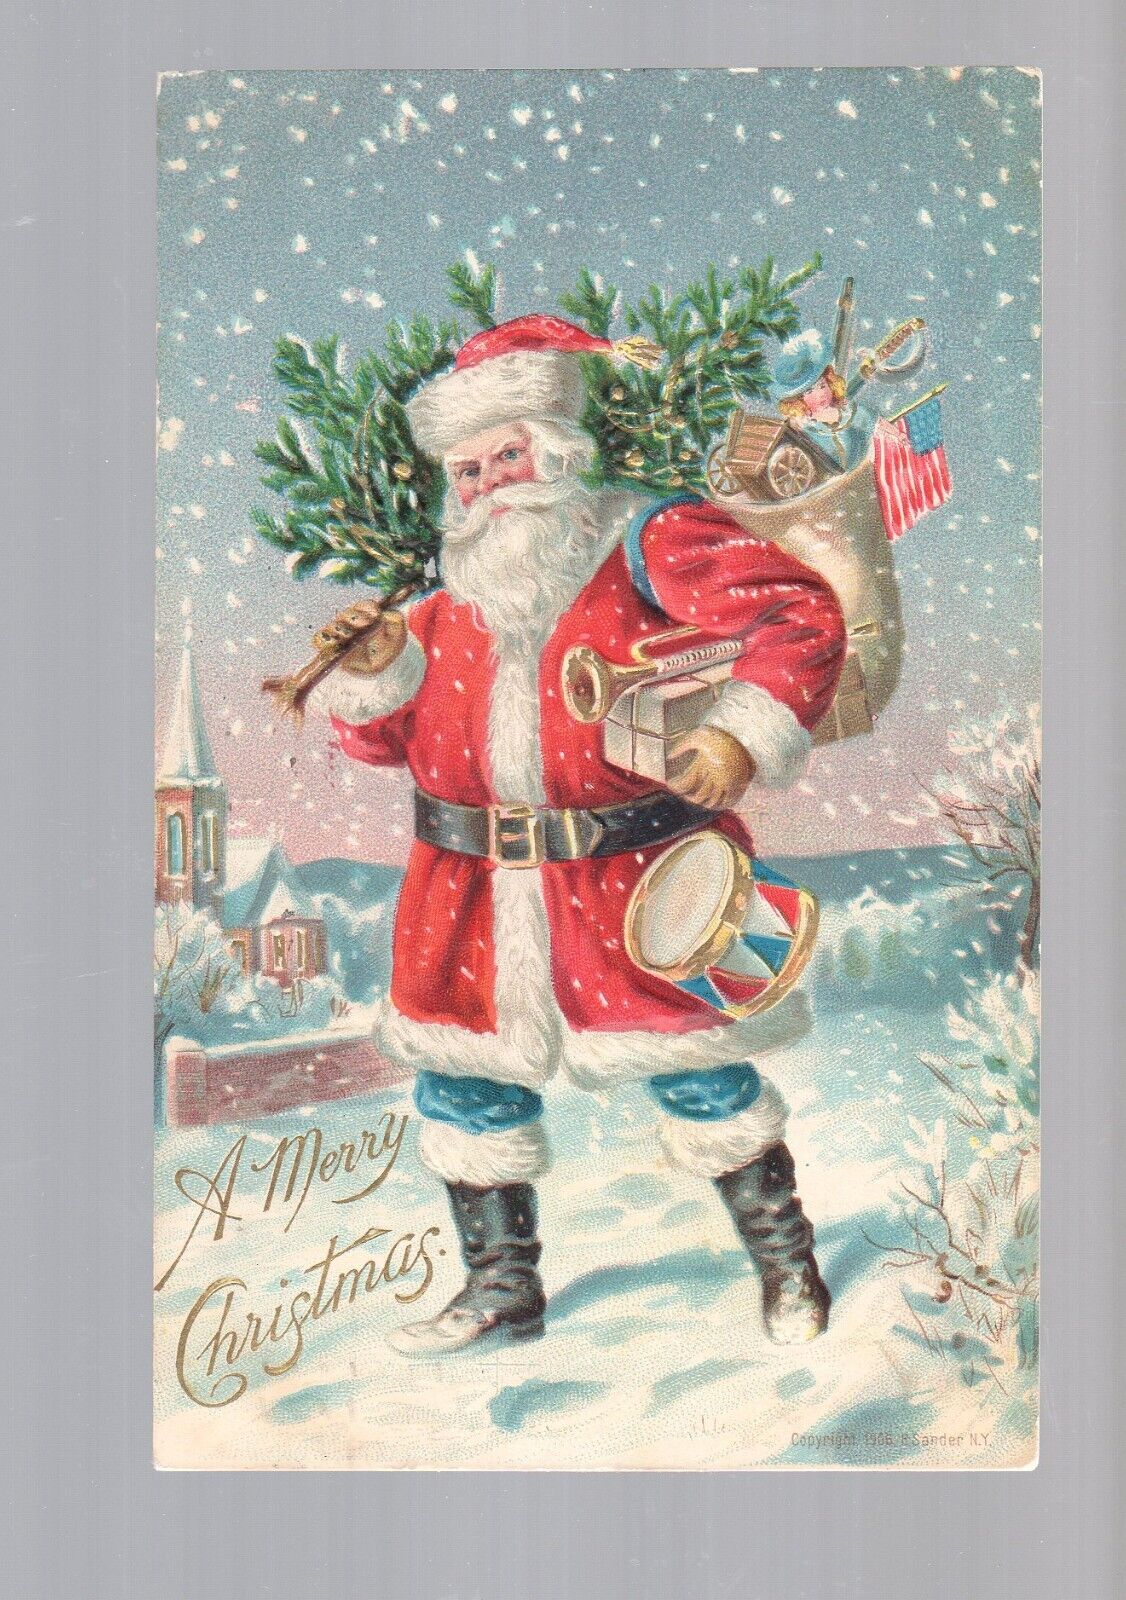 sn810 Antique postcard Christmas Santa Claus Red suit lots of gifts tree 1907